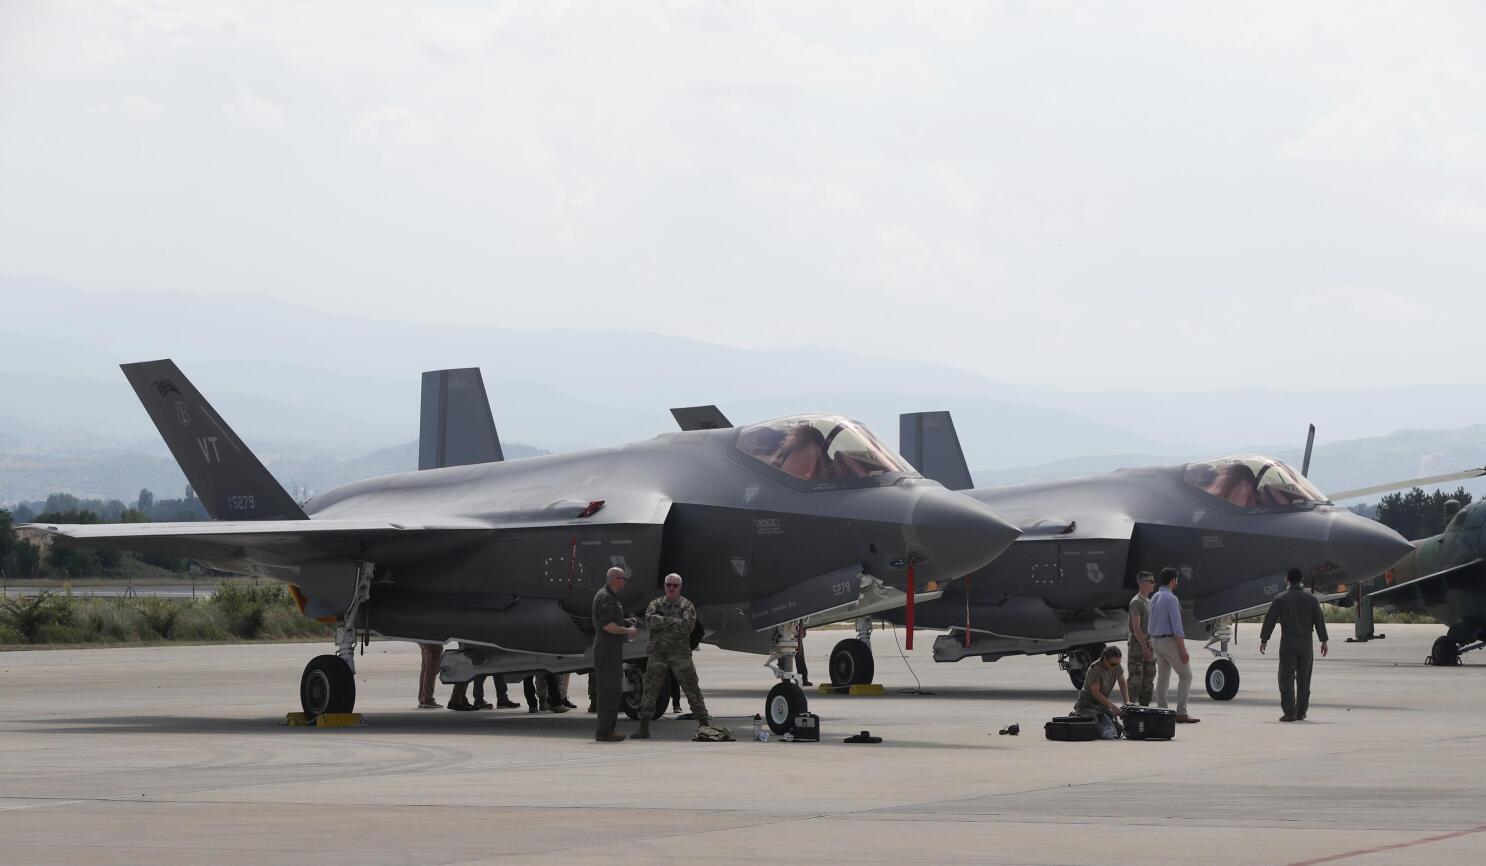 Canada finalizes agreement to buy 88 US F-35 fighter jets